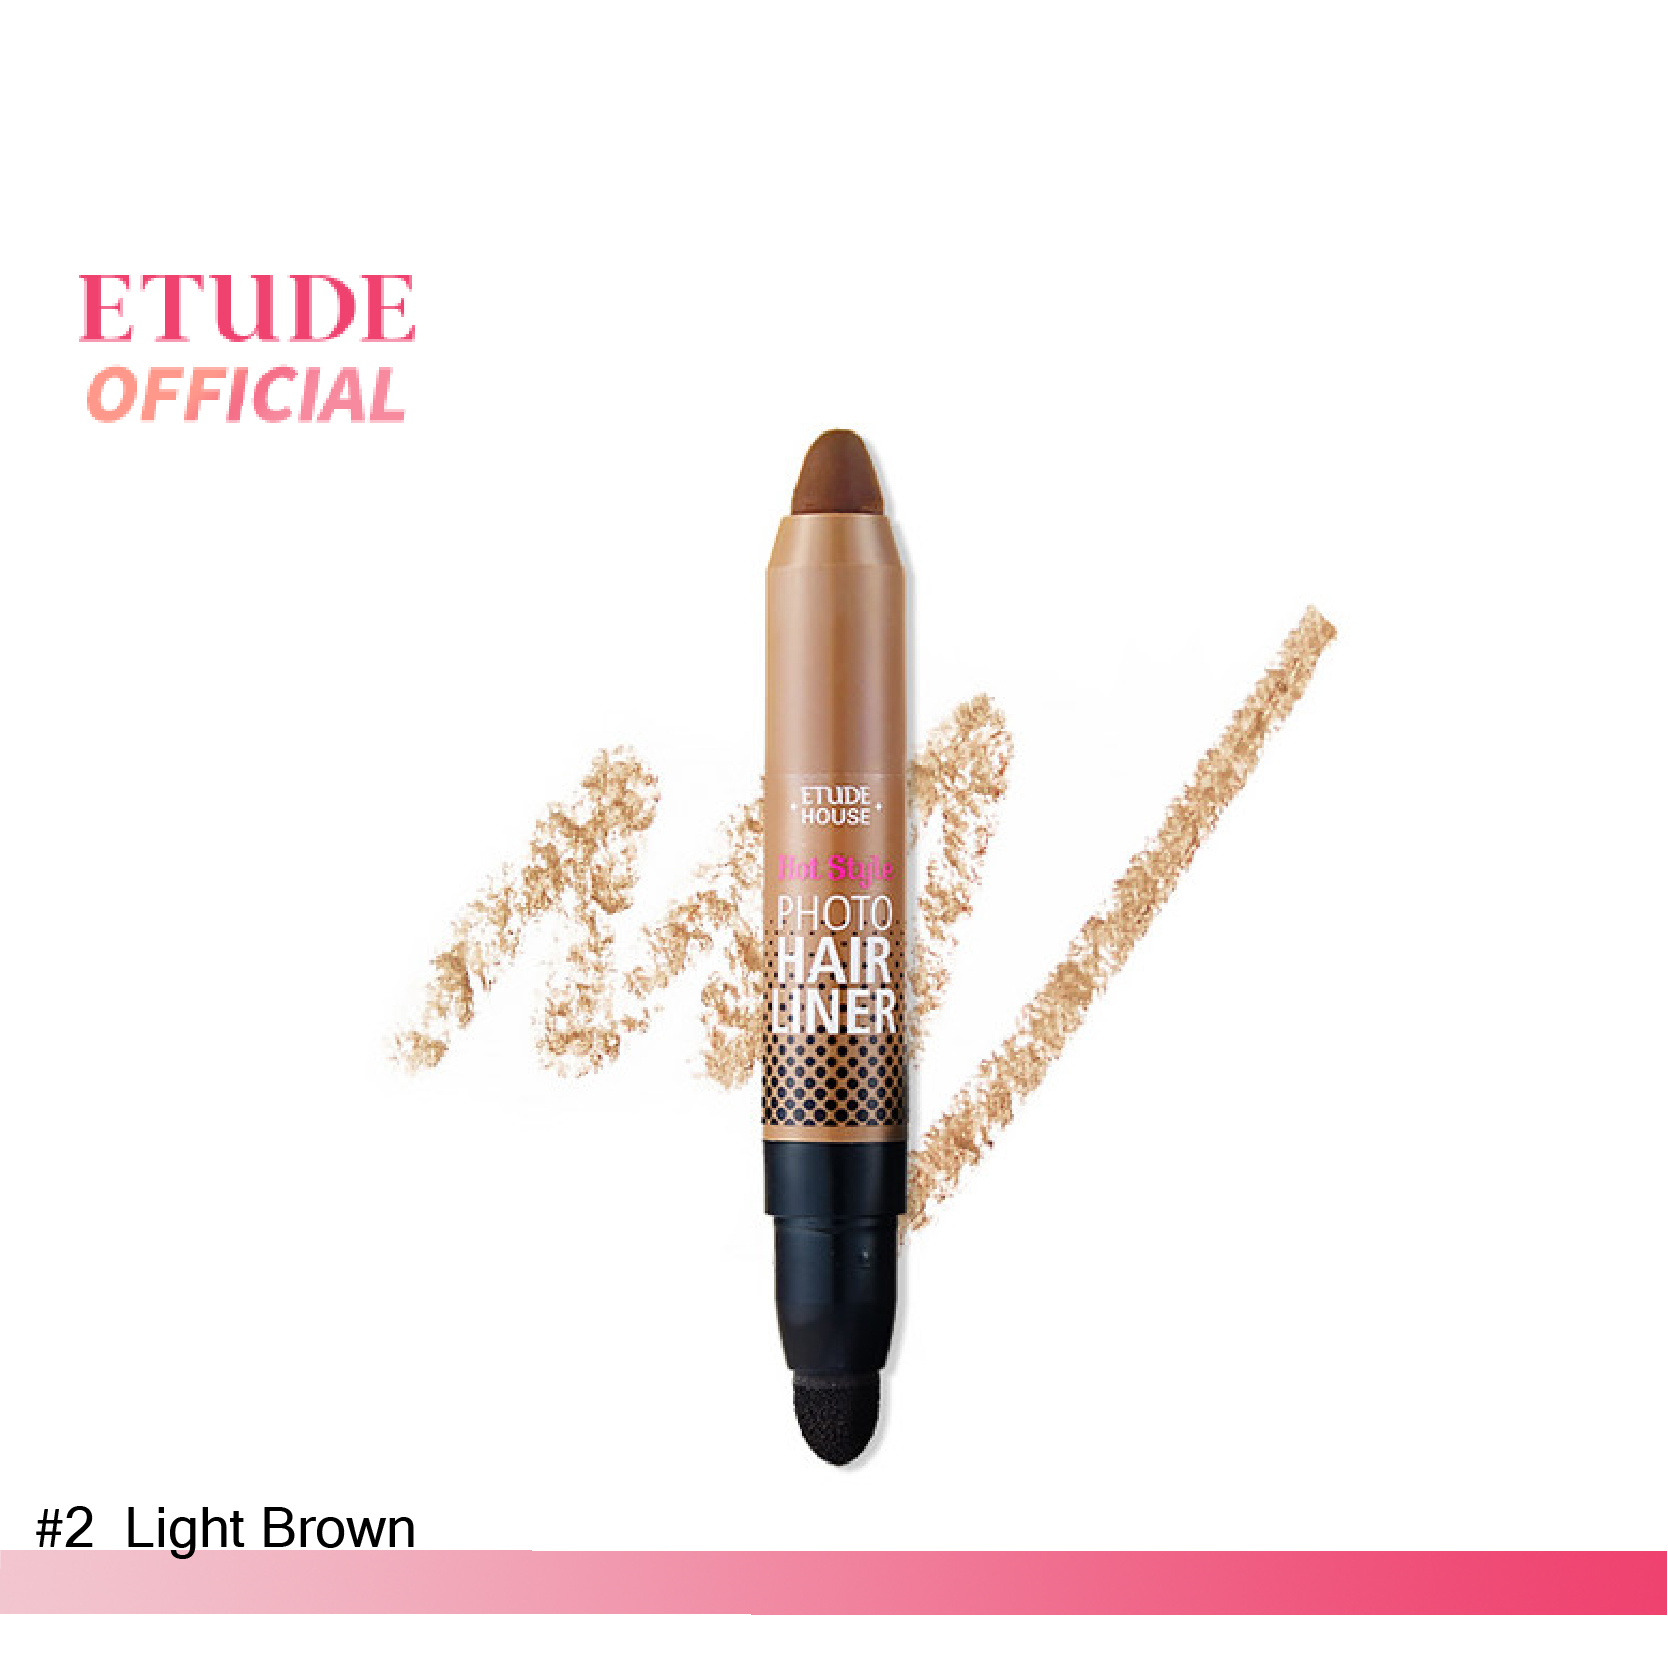 ETUDE Hot Style Photo Hair Liner #2 Light Brown (2.7 g)